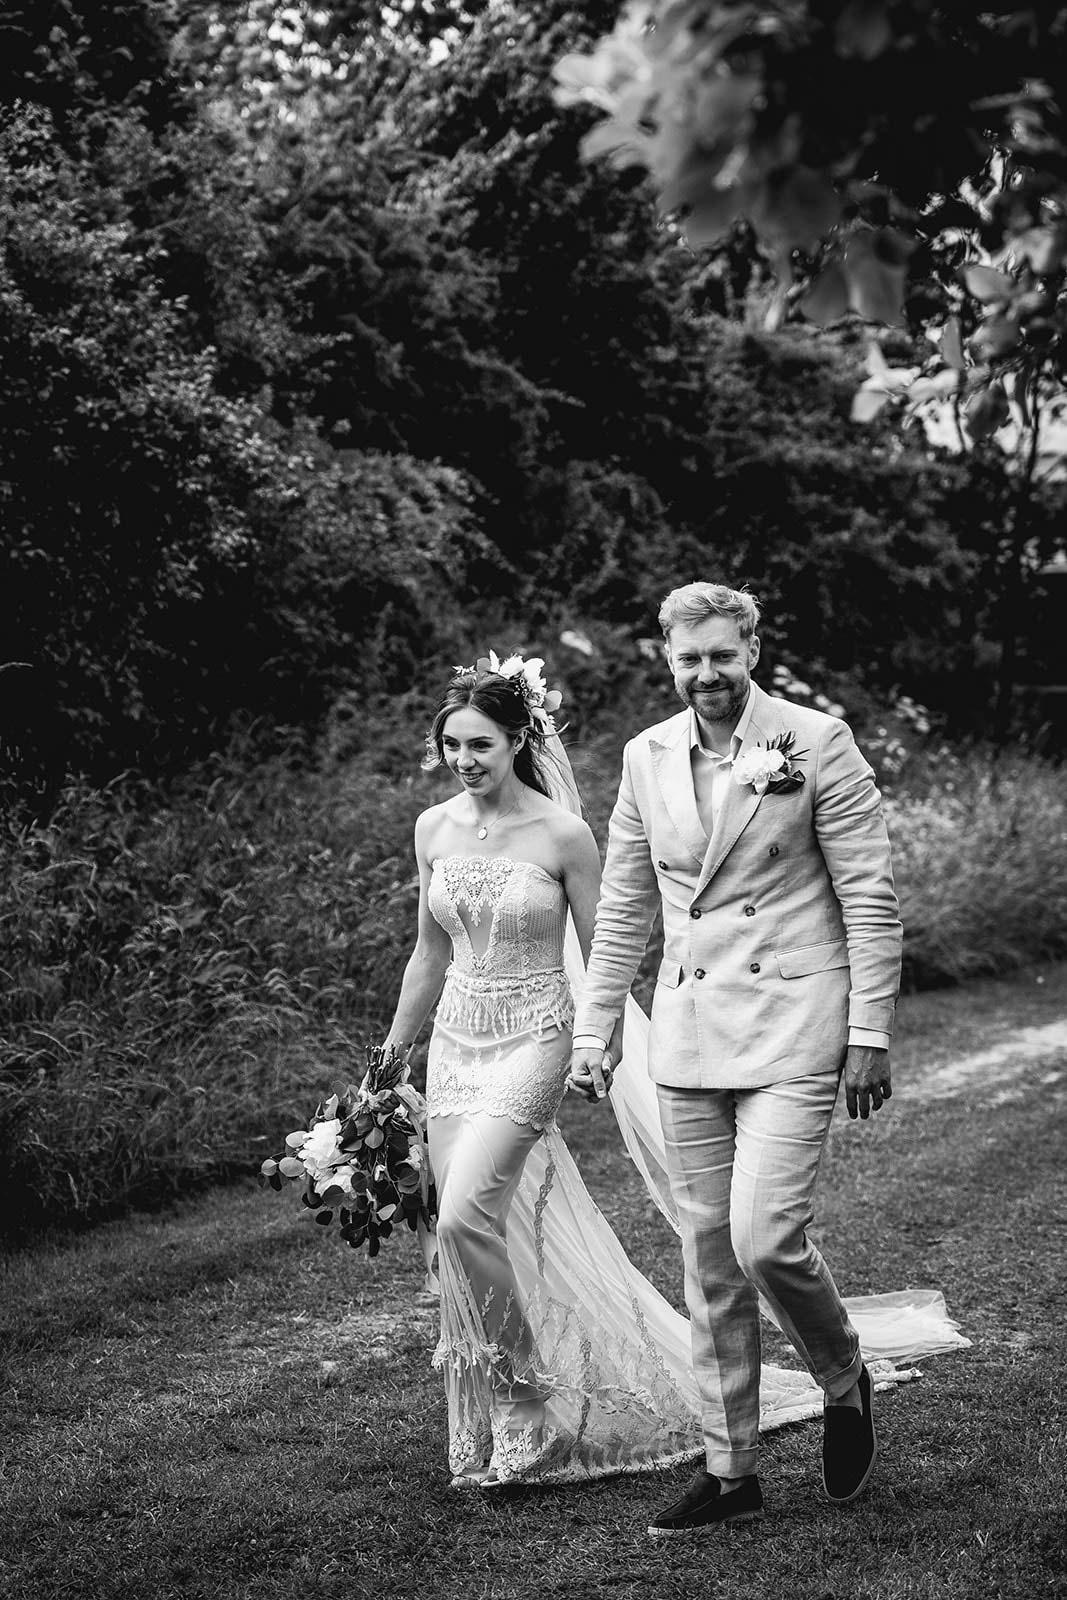 Black and white photo of bride and groom walking after wedding ceremony